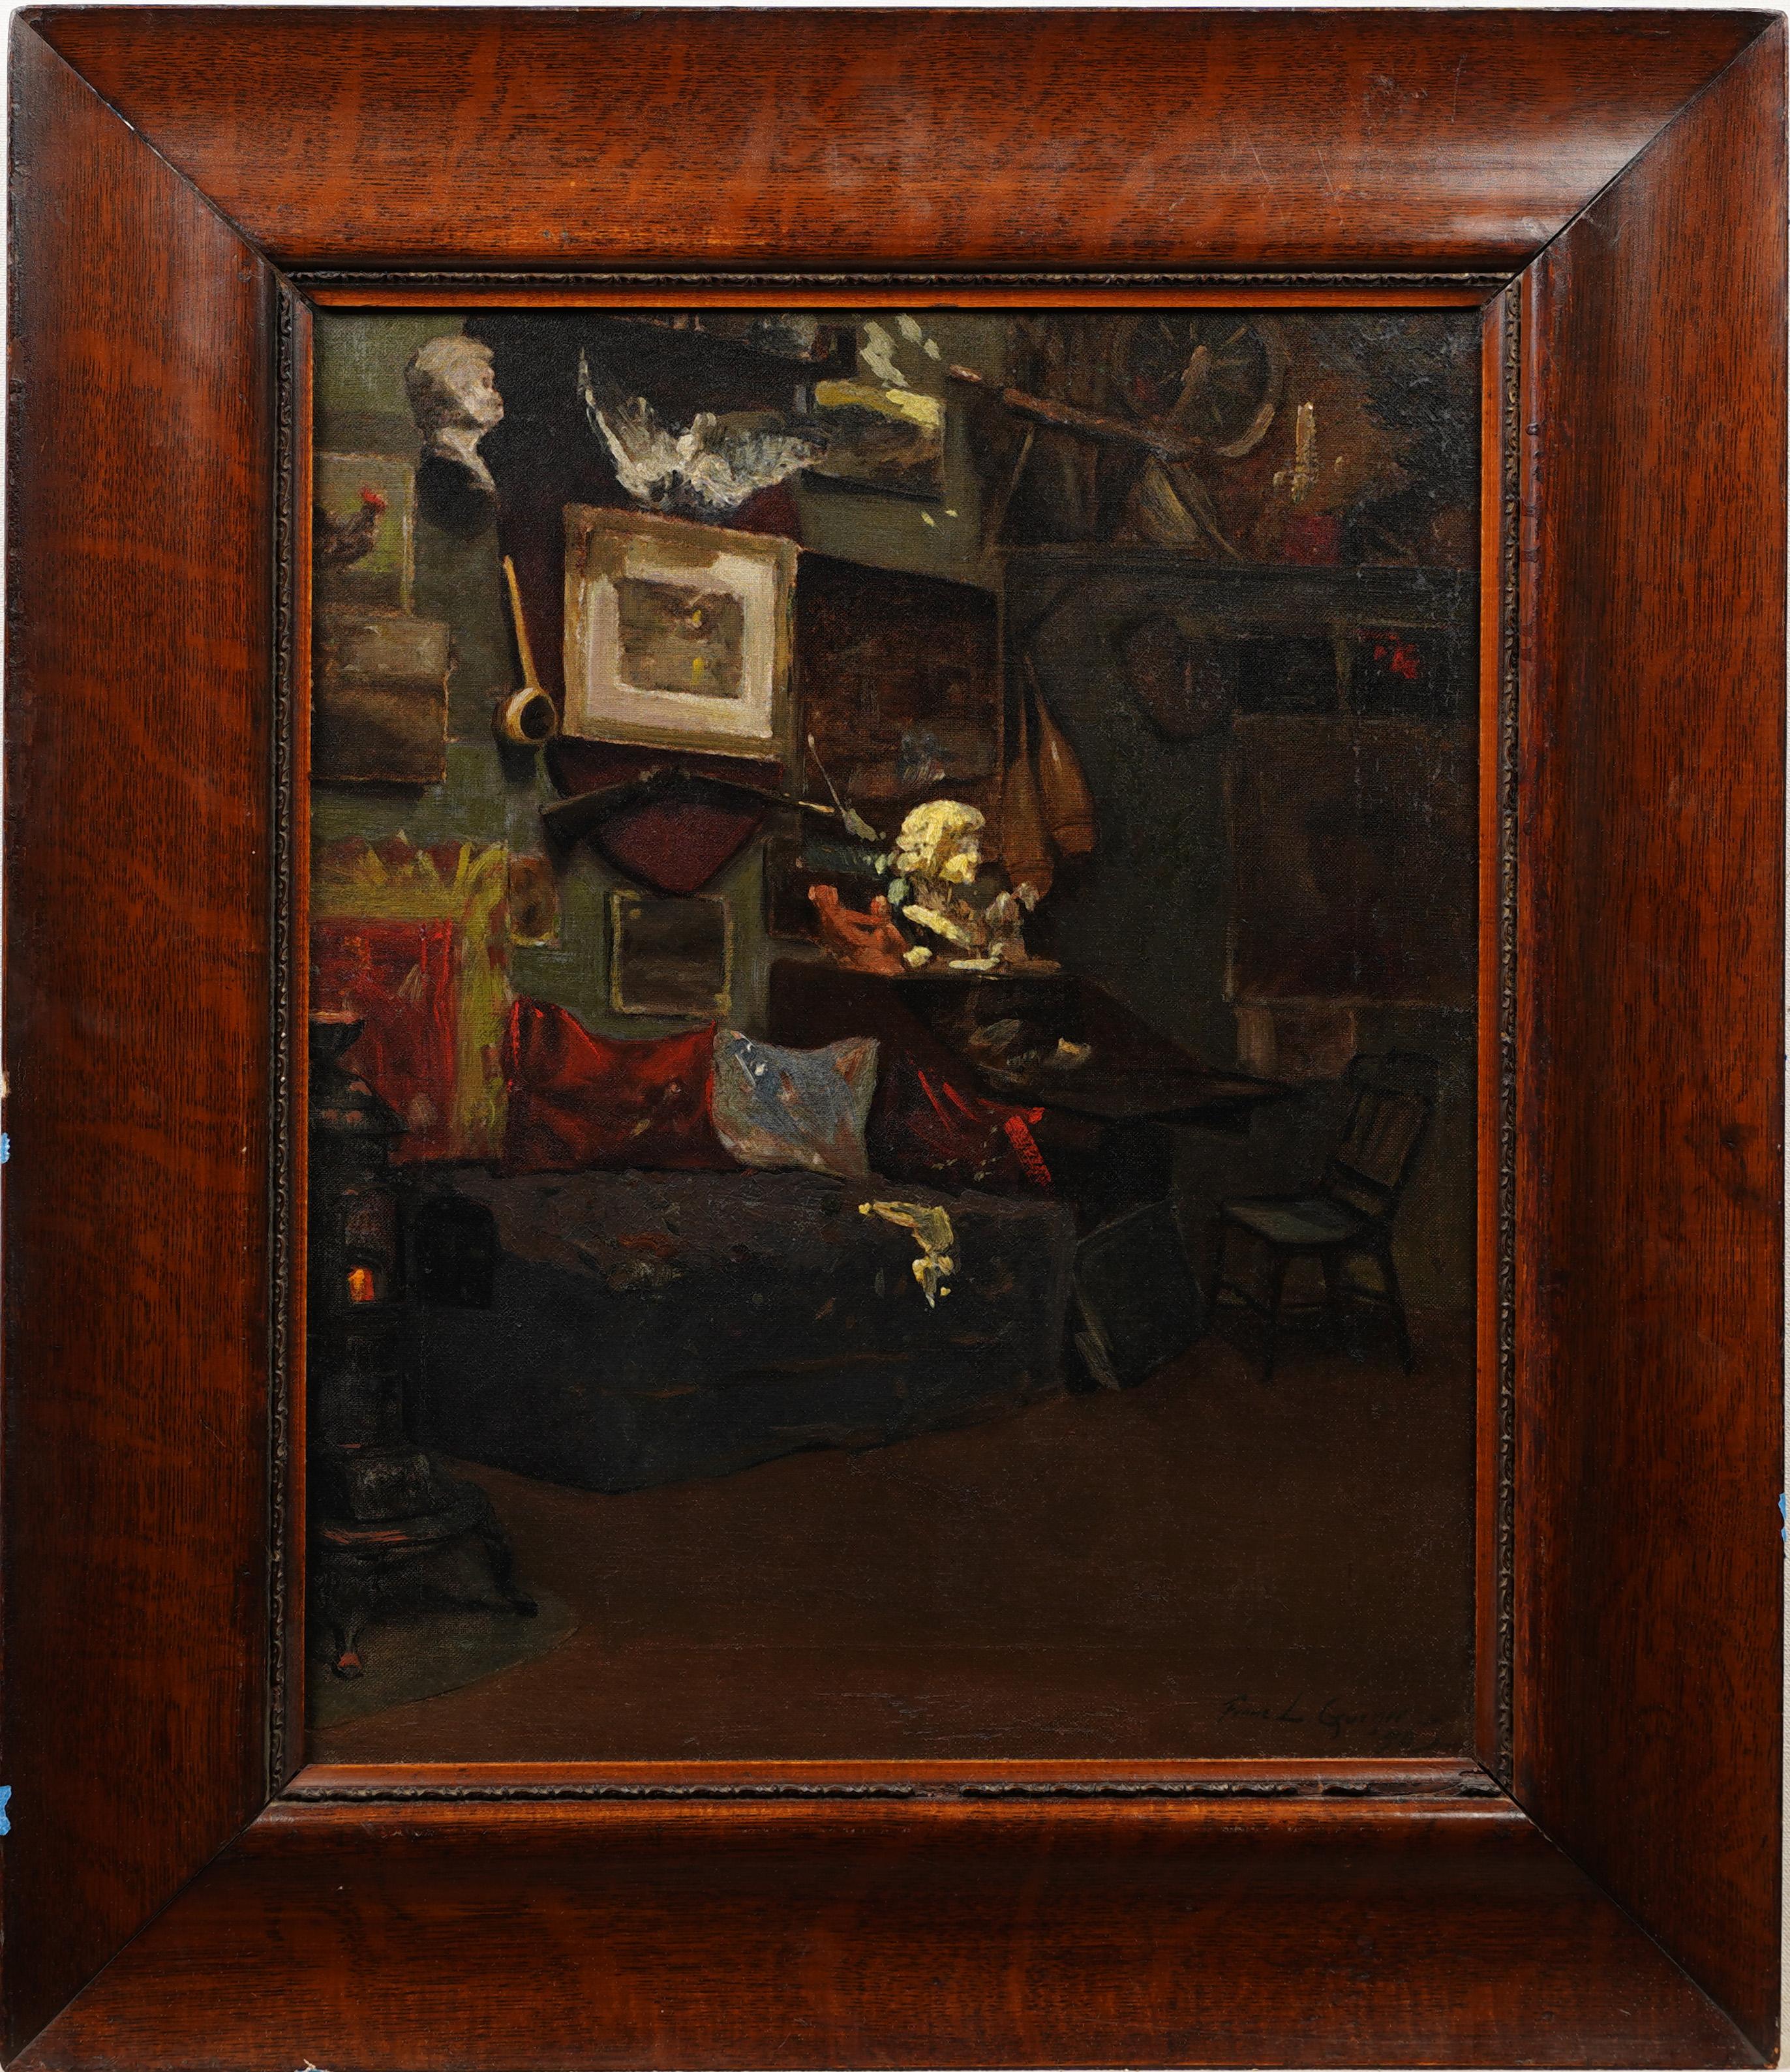 Unknown Still-Life Painting - Antique American School Framed Interior Scene Artist Studio Signed Oil Painting